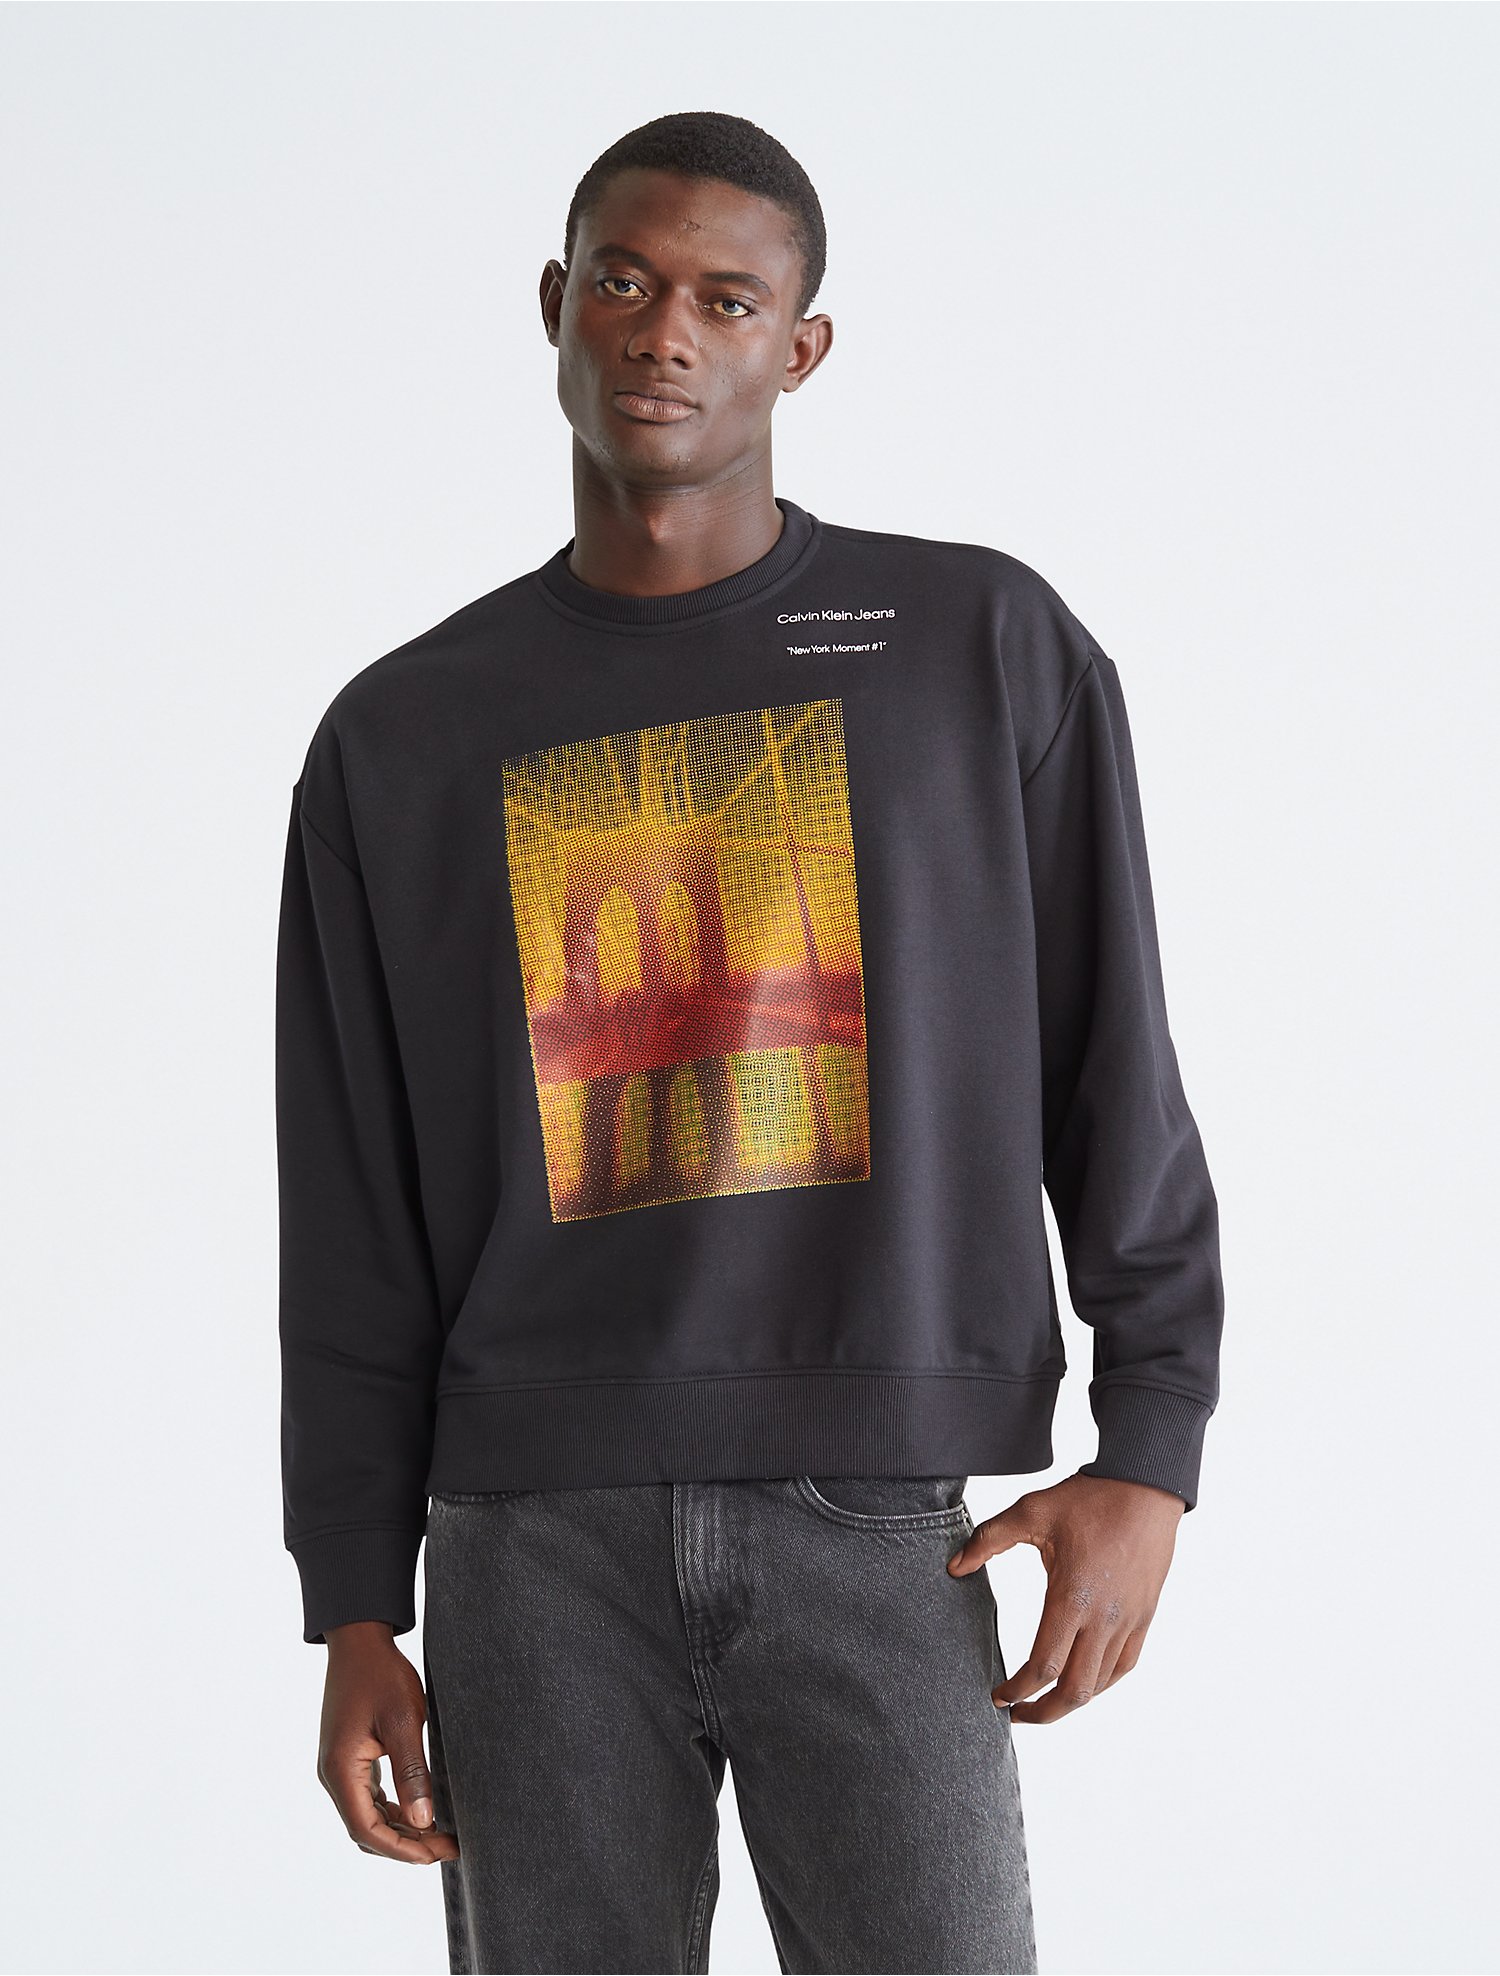 Relaxed Fit NY Moment #1 Crewneck Sweatshirt | Calvin Klein® USA